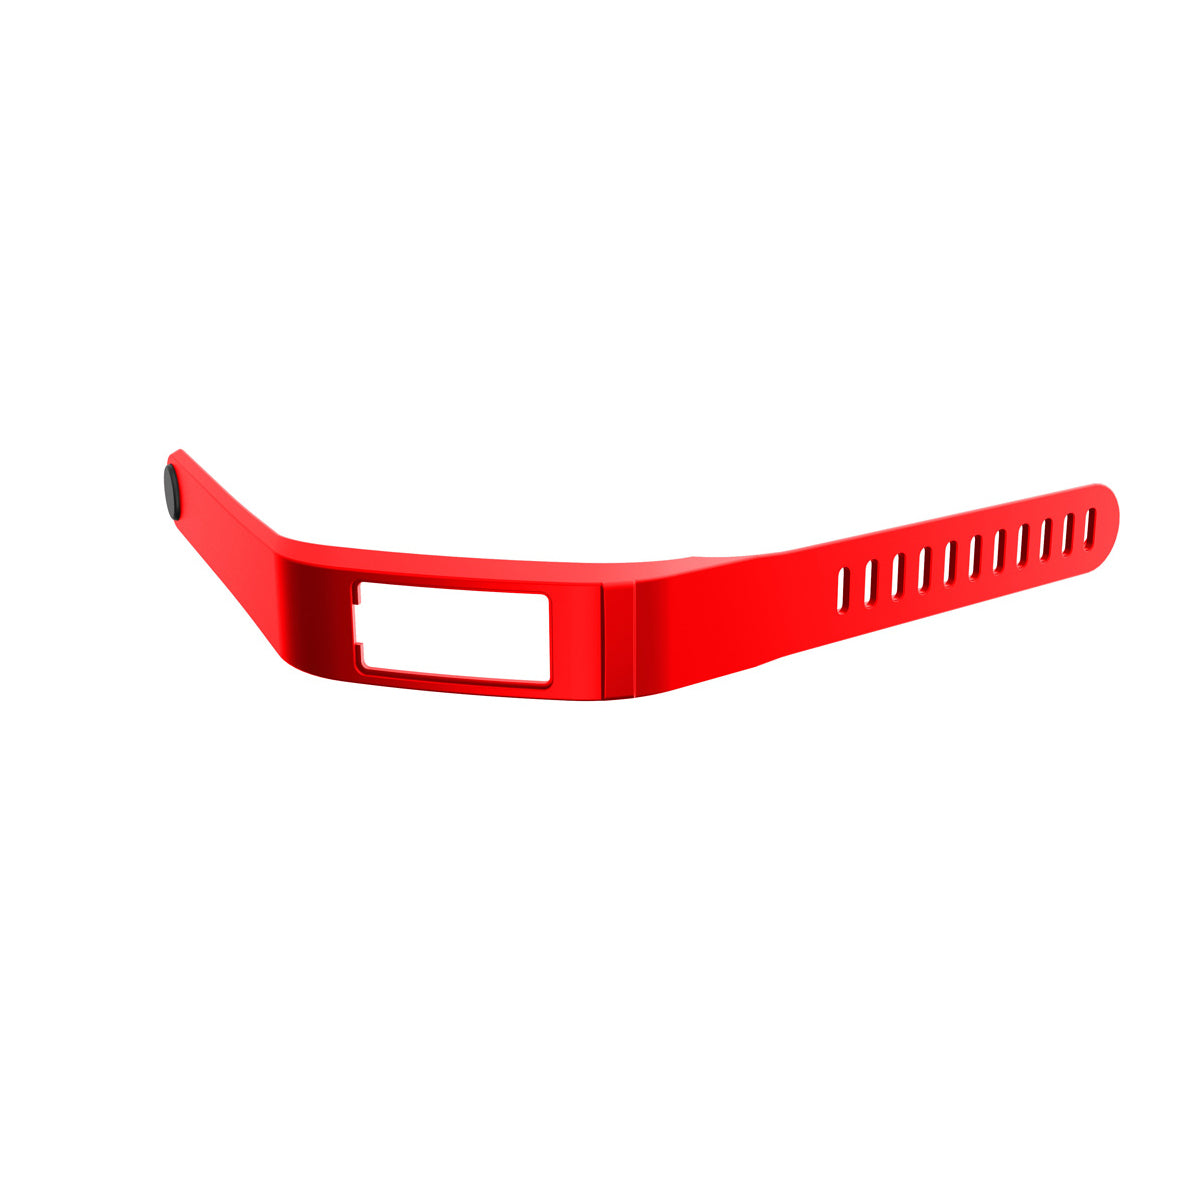 Garmin Vivofit 2 Bands Replacement Strap With Clasp Large Red 2-Pack 